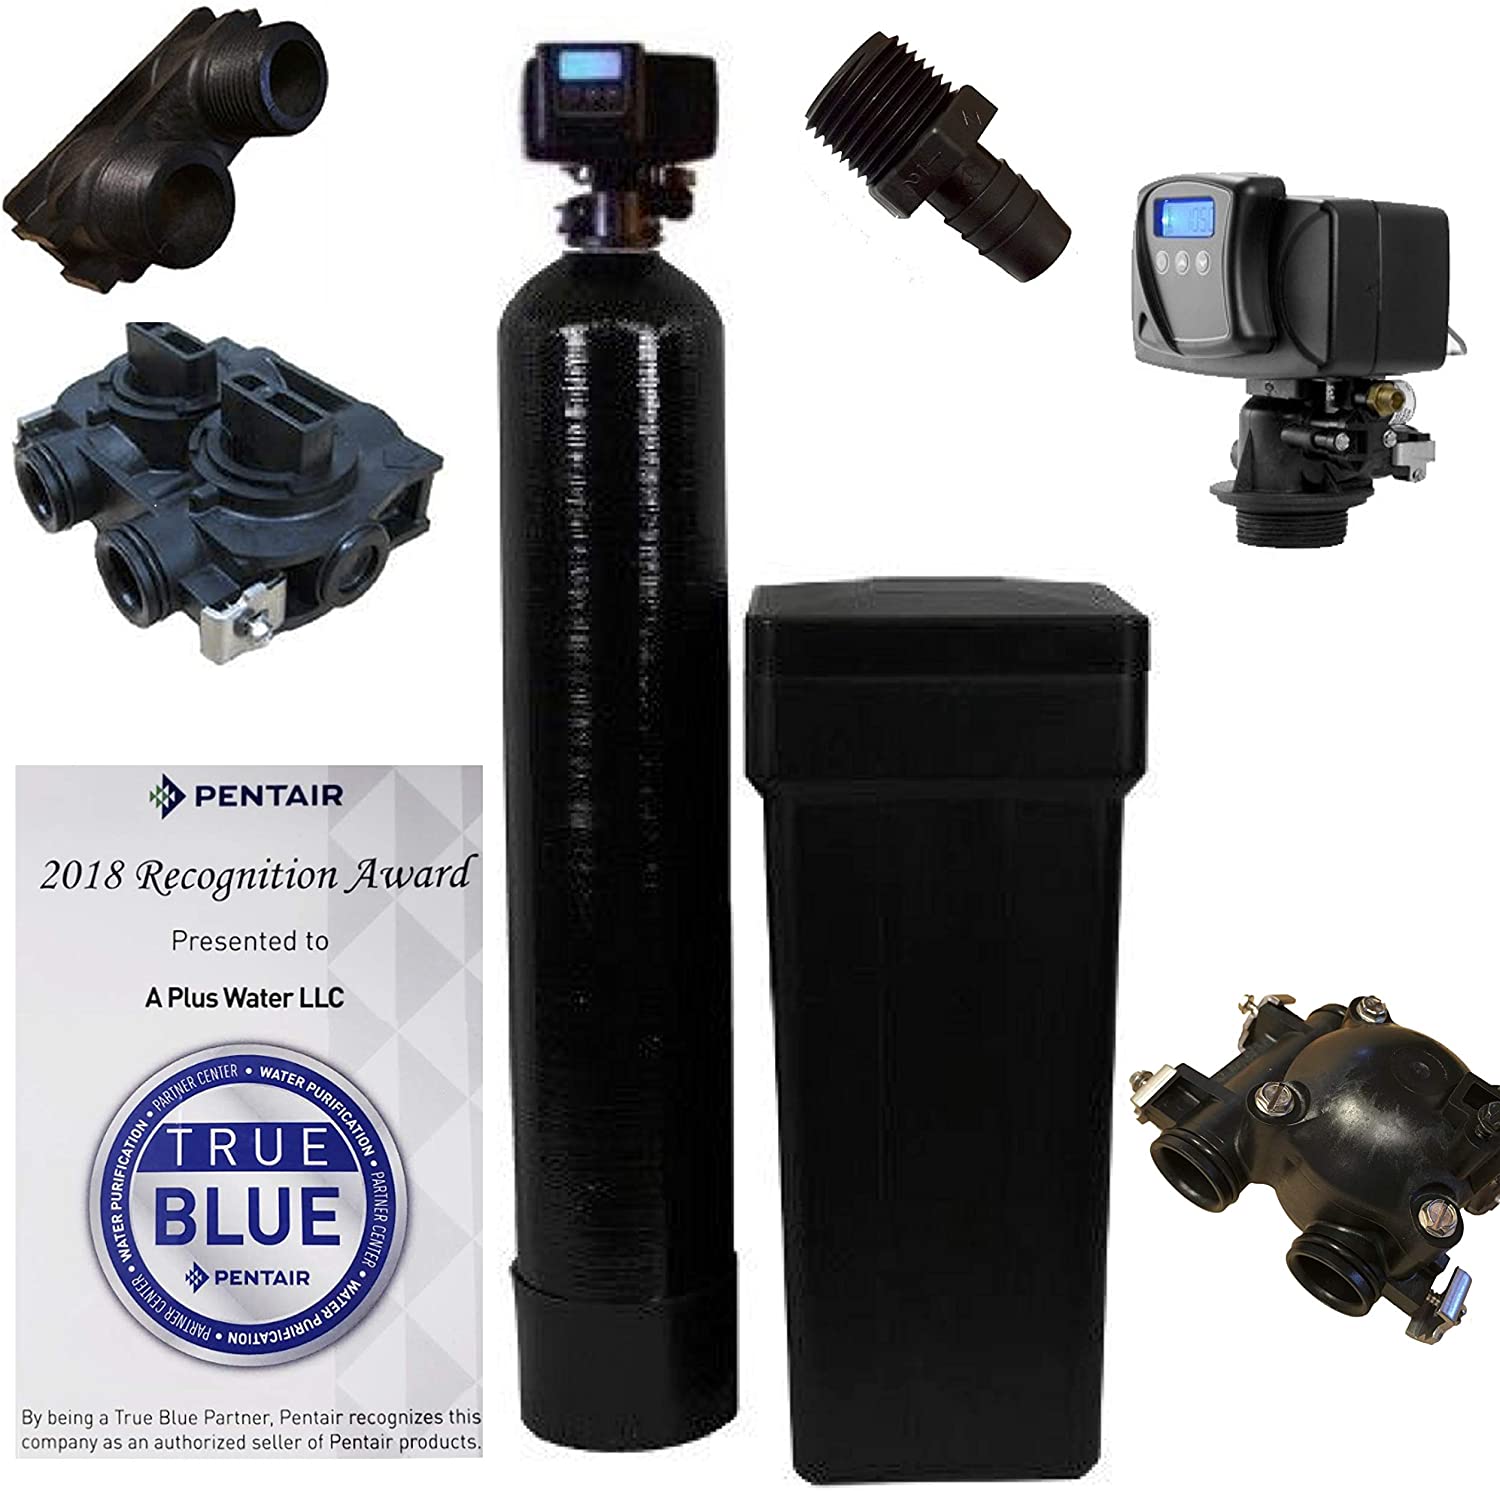 Pentair WS48-56sxt10 Fleck Water Softener for Well Water